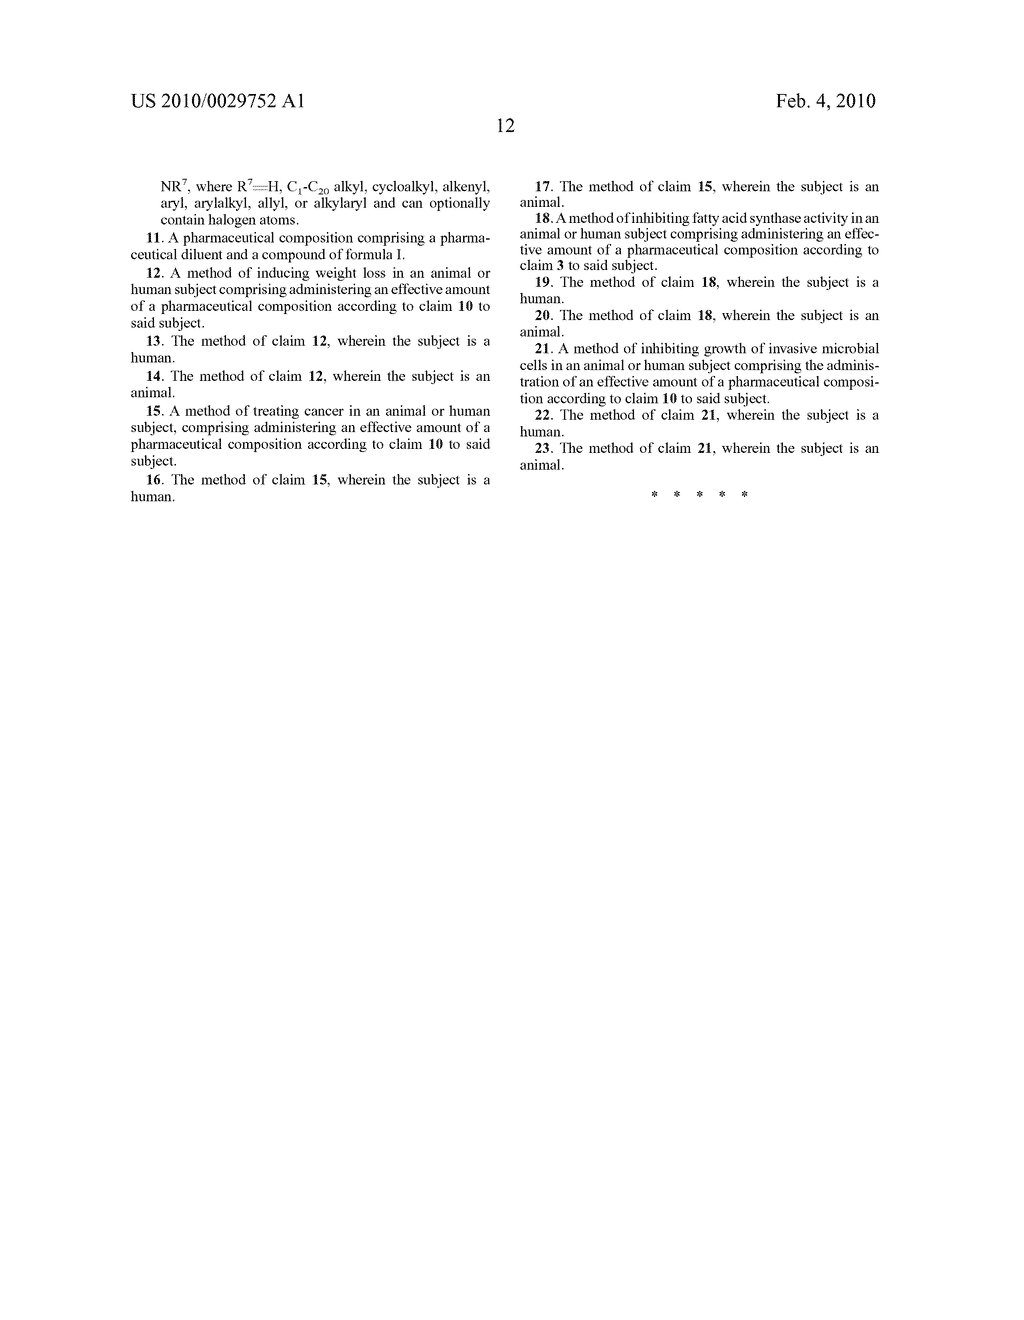 NOVEL COMPOUNDS, PHARMACEUTICAL COMPOSITIONS CONTAINING SAME, AND METHODS OF USE FOR SAME - diagram, schematic, and image 15